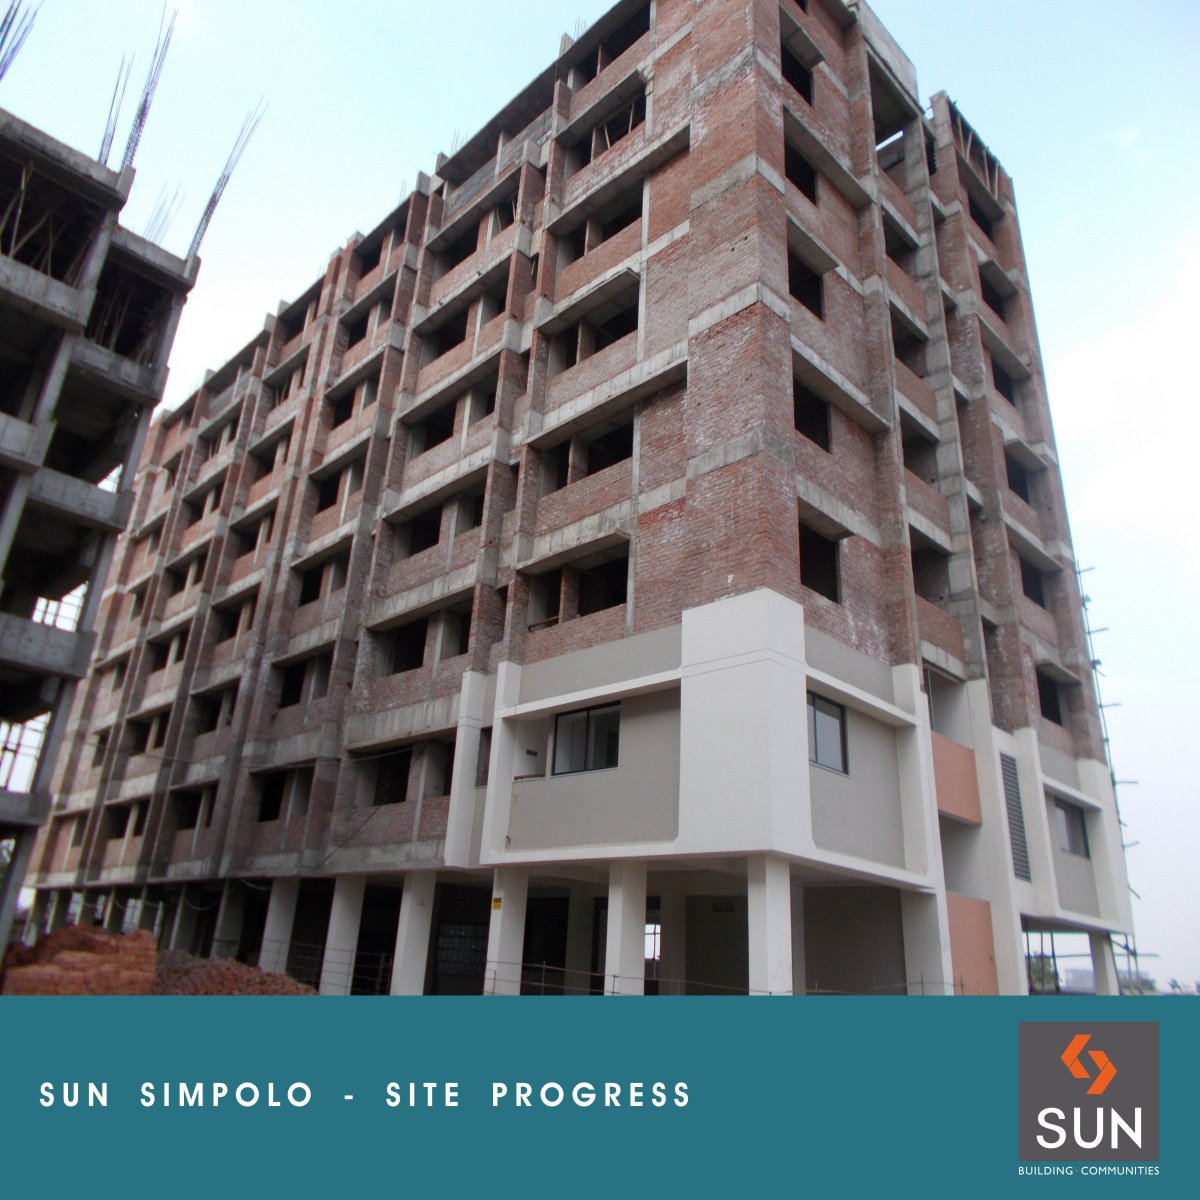 Sharing the photo of the progress of Project Happiness - Sun Simpolo.

Explore more at: https://t.co/vVda4qLDzu https://t.co/aRm9hn4Mh8